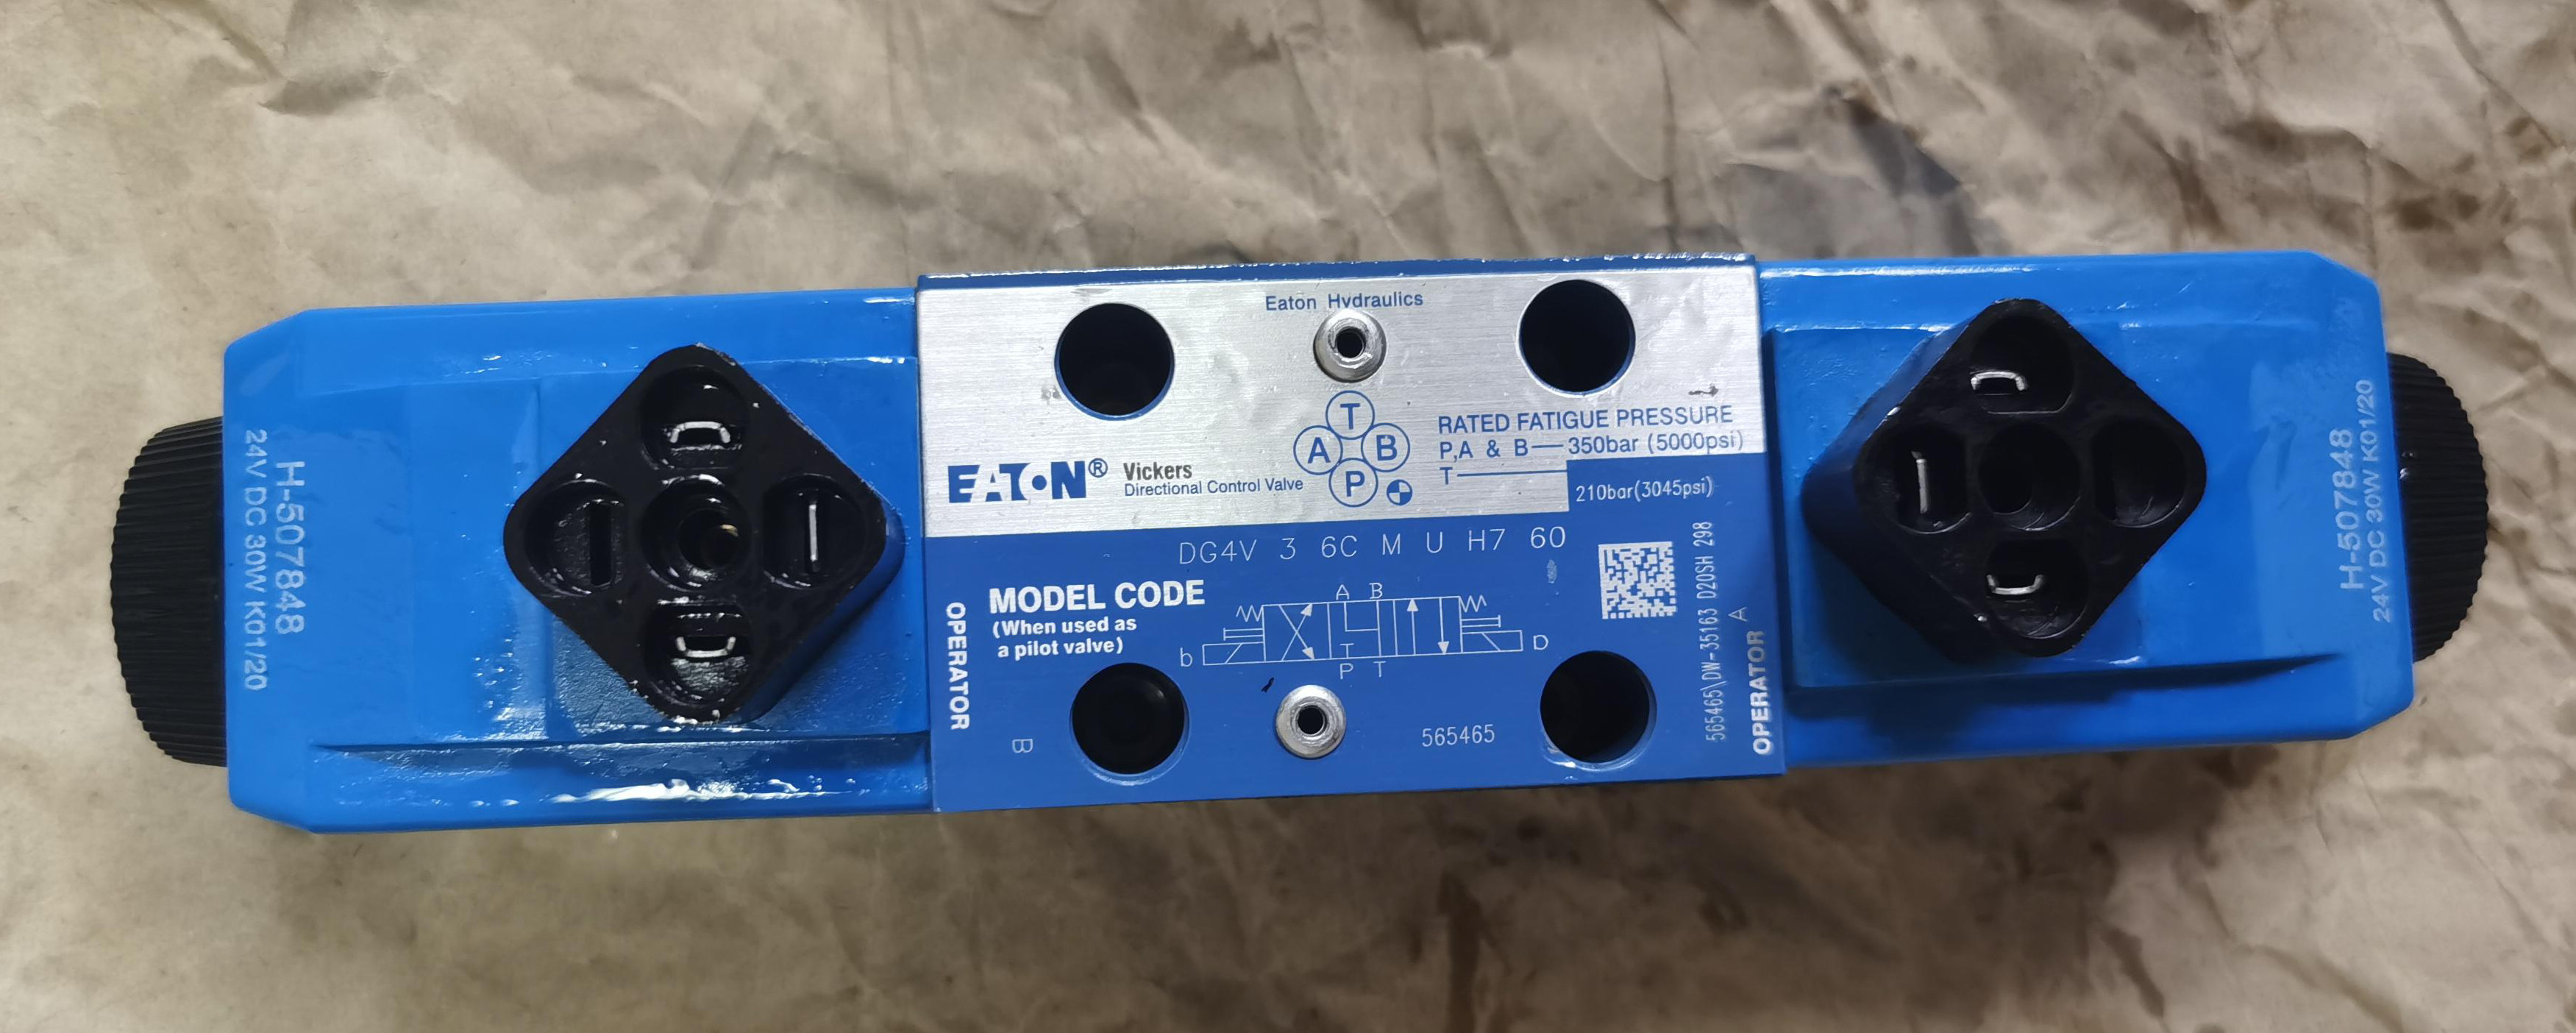 Eaton Vickers DG4V-3-6C-M-U-H7-60 Solenoid Operated Directional Control Valve for sale